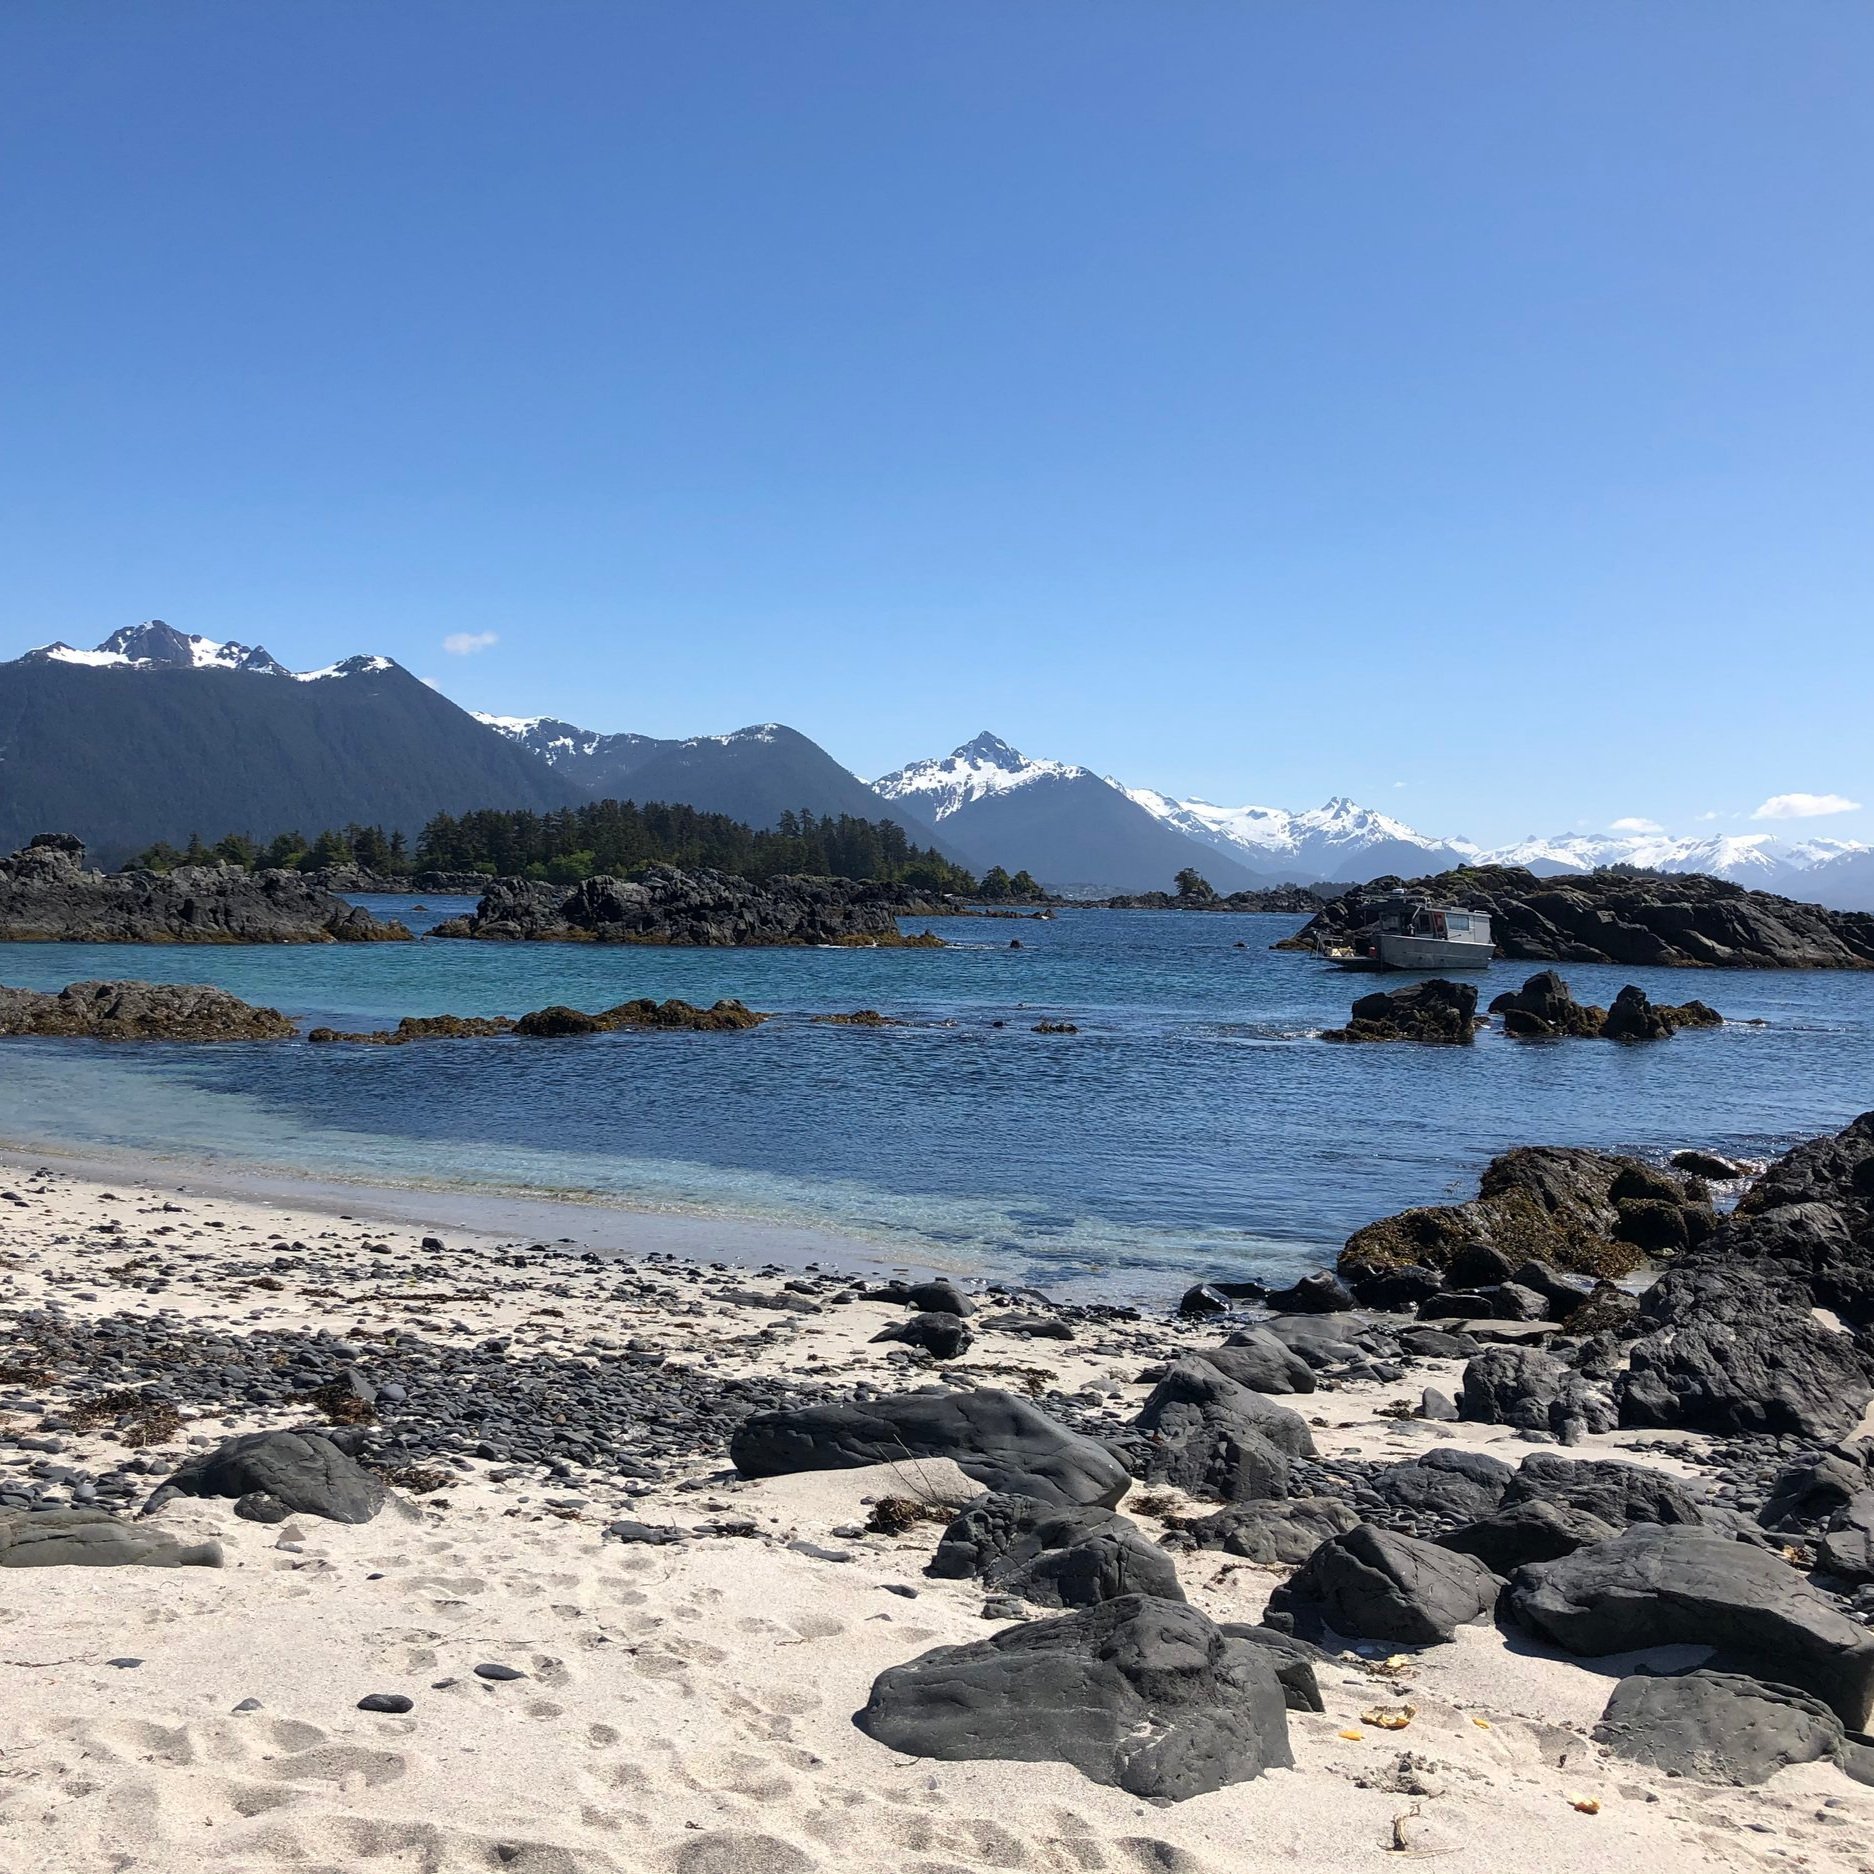 White sandy beach with volcanic rock, mountains in the distance and blue water.